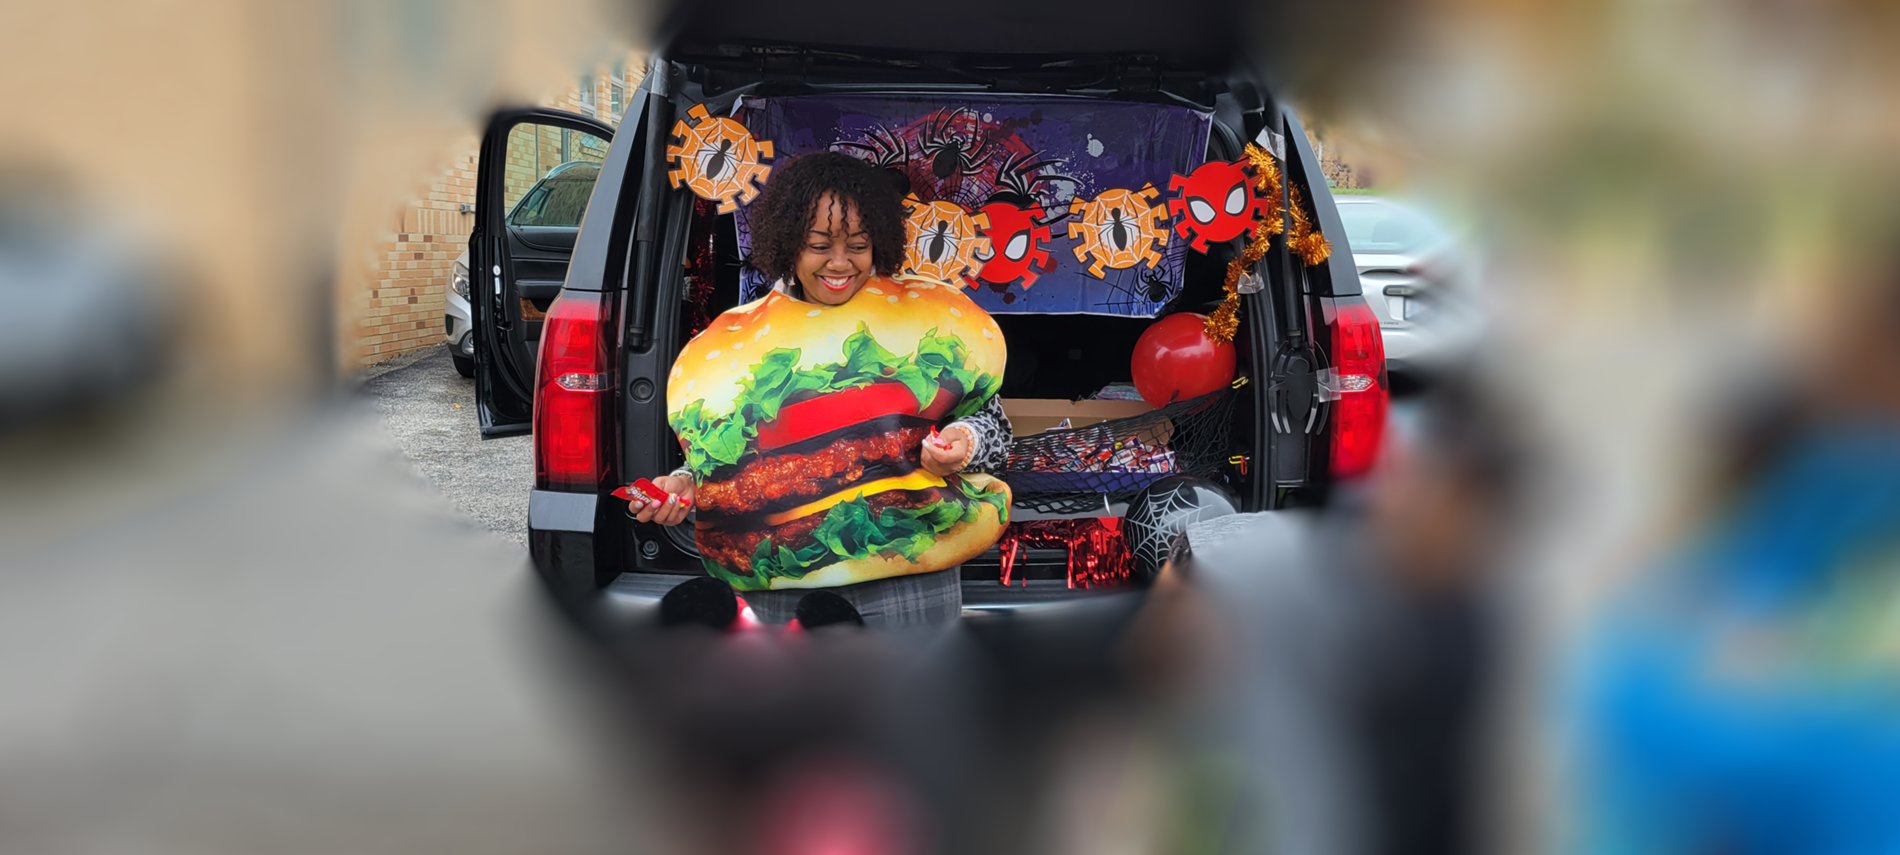 Trunk or treat pictures. Parent dressed as hamburger